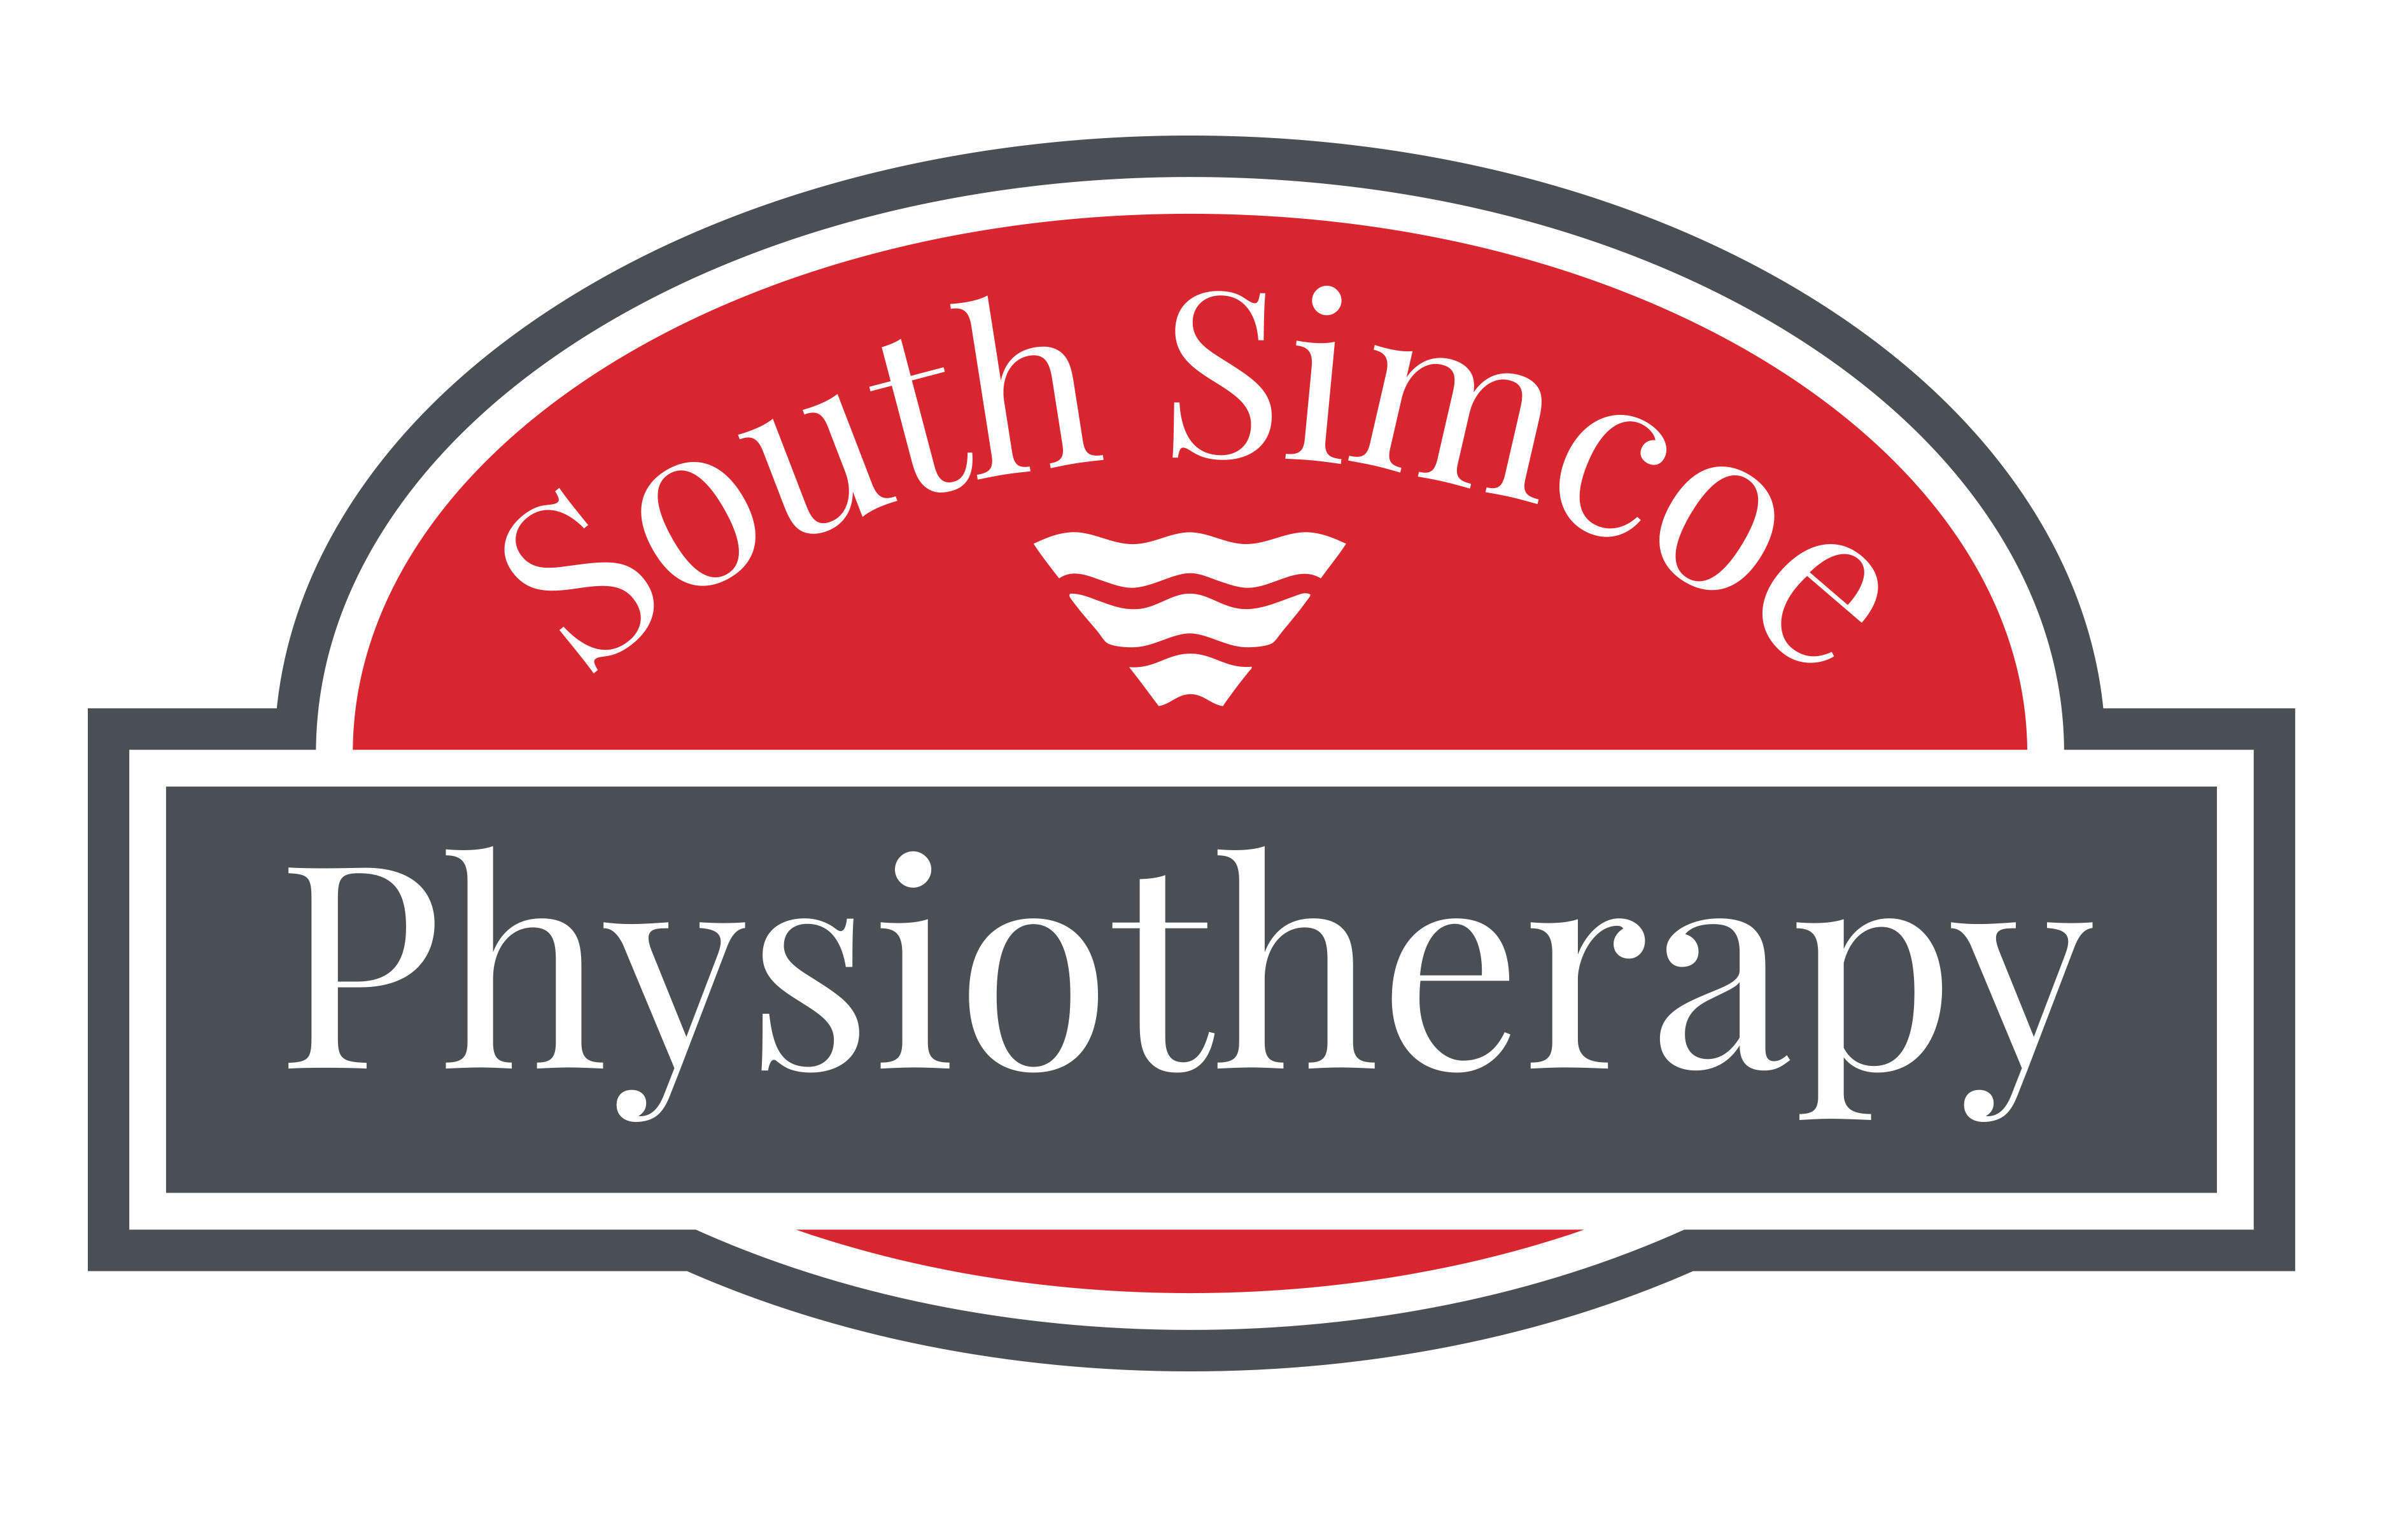 SOUTH SIMCOE PHYSIOTHERAPY